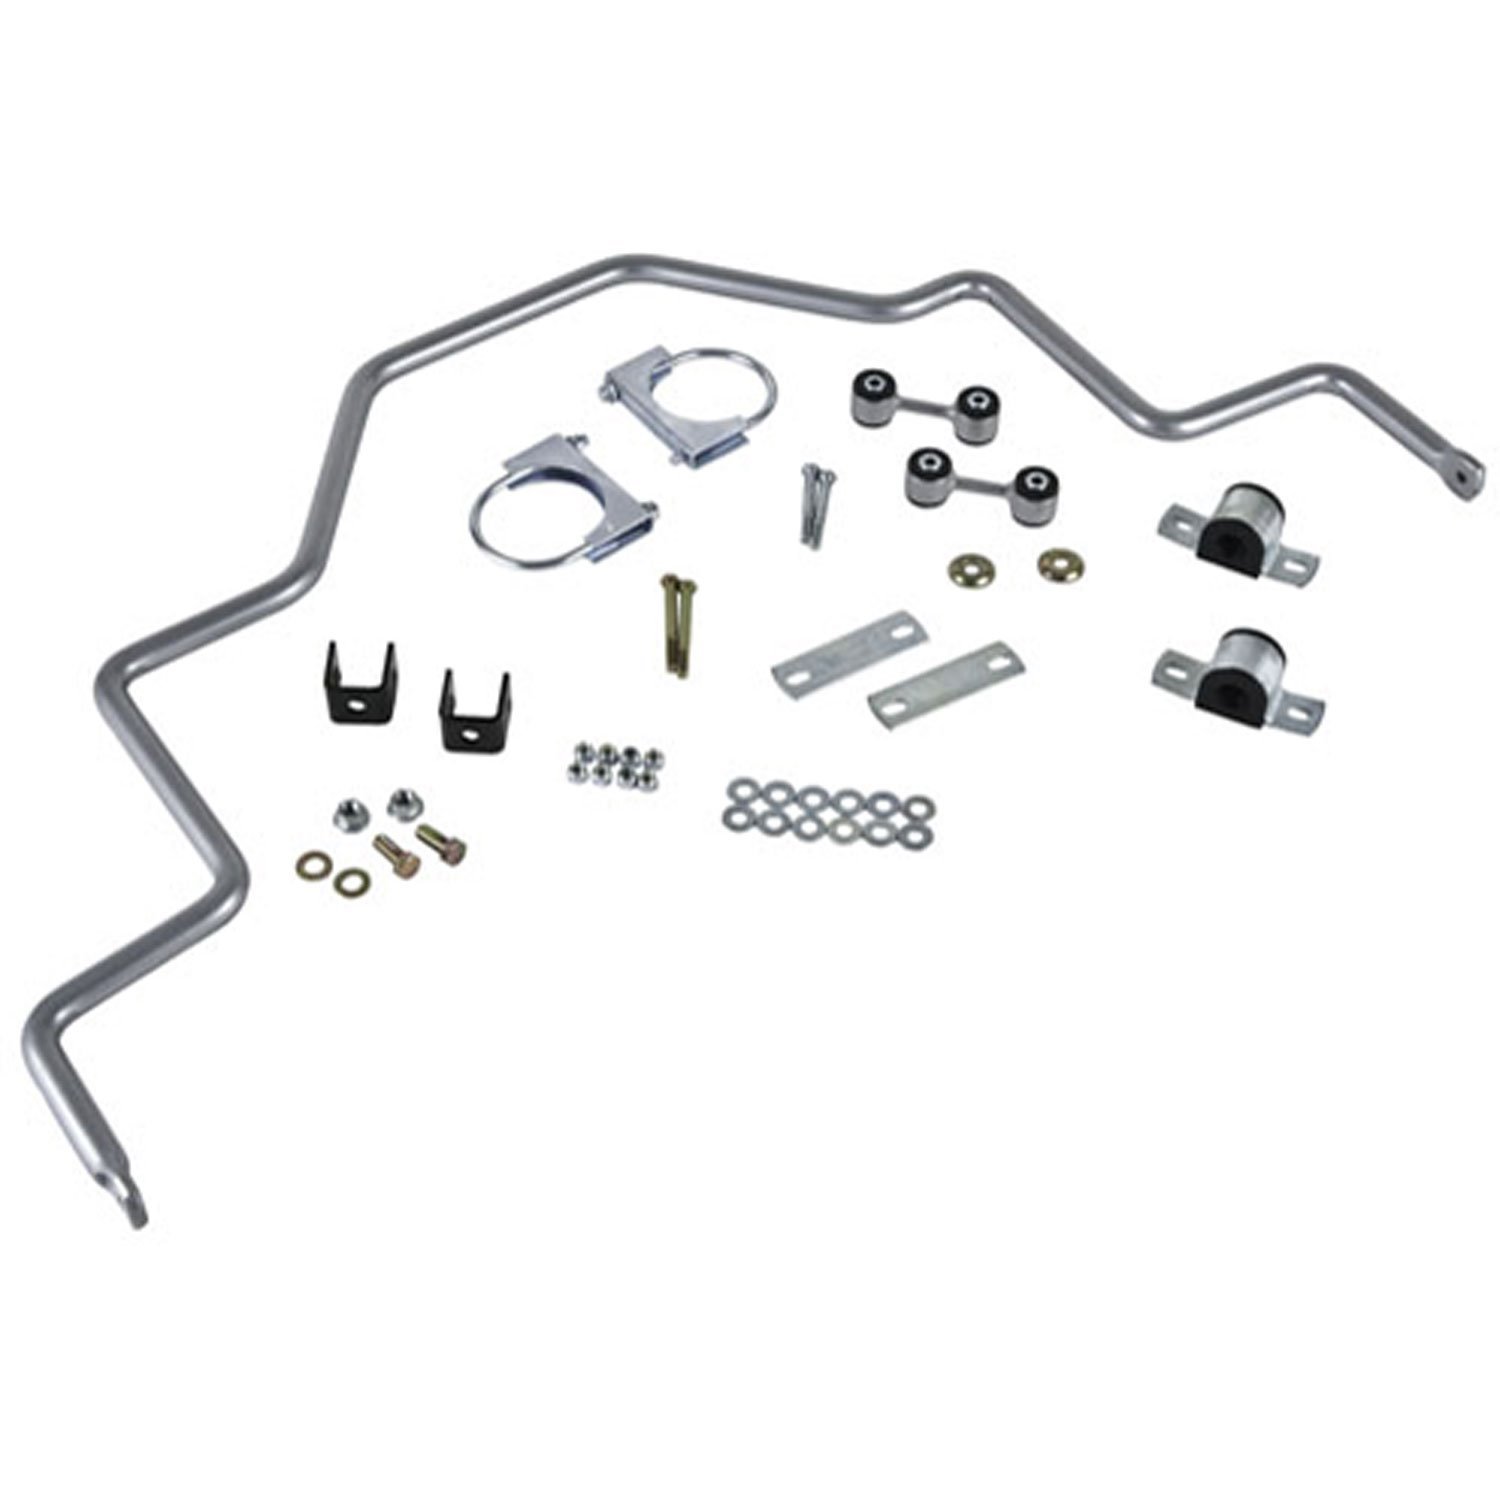 Rear Sway Bar Kit for 1997-2003 Ford F-150